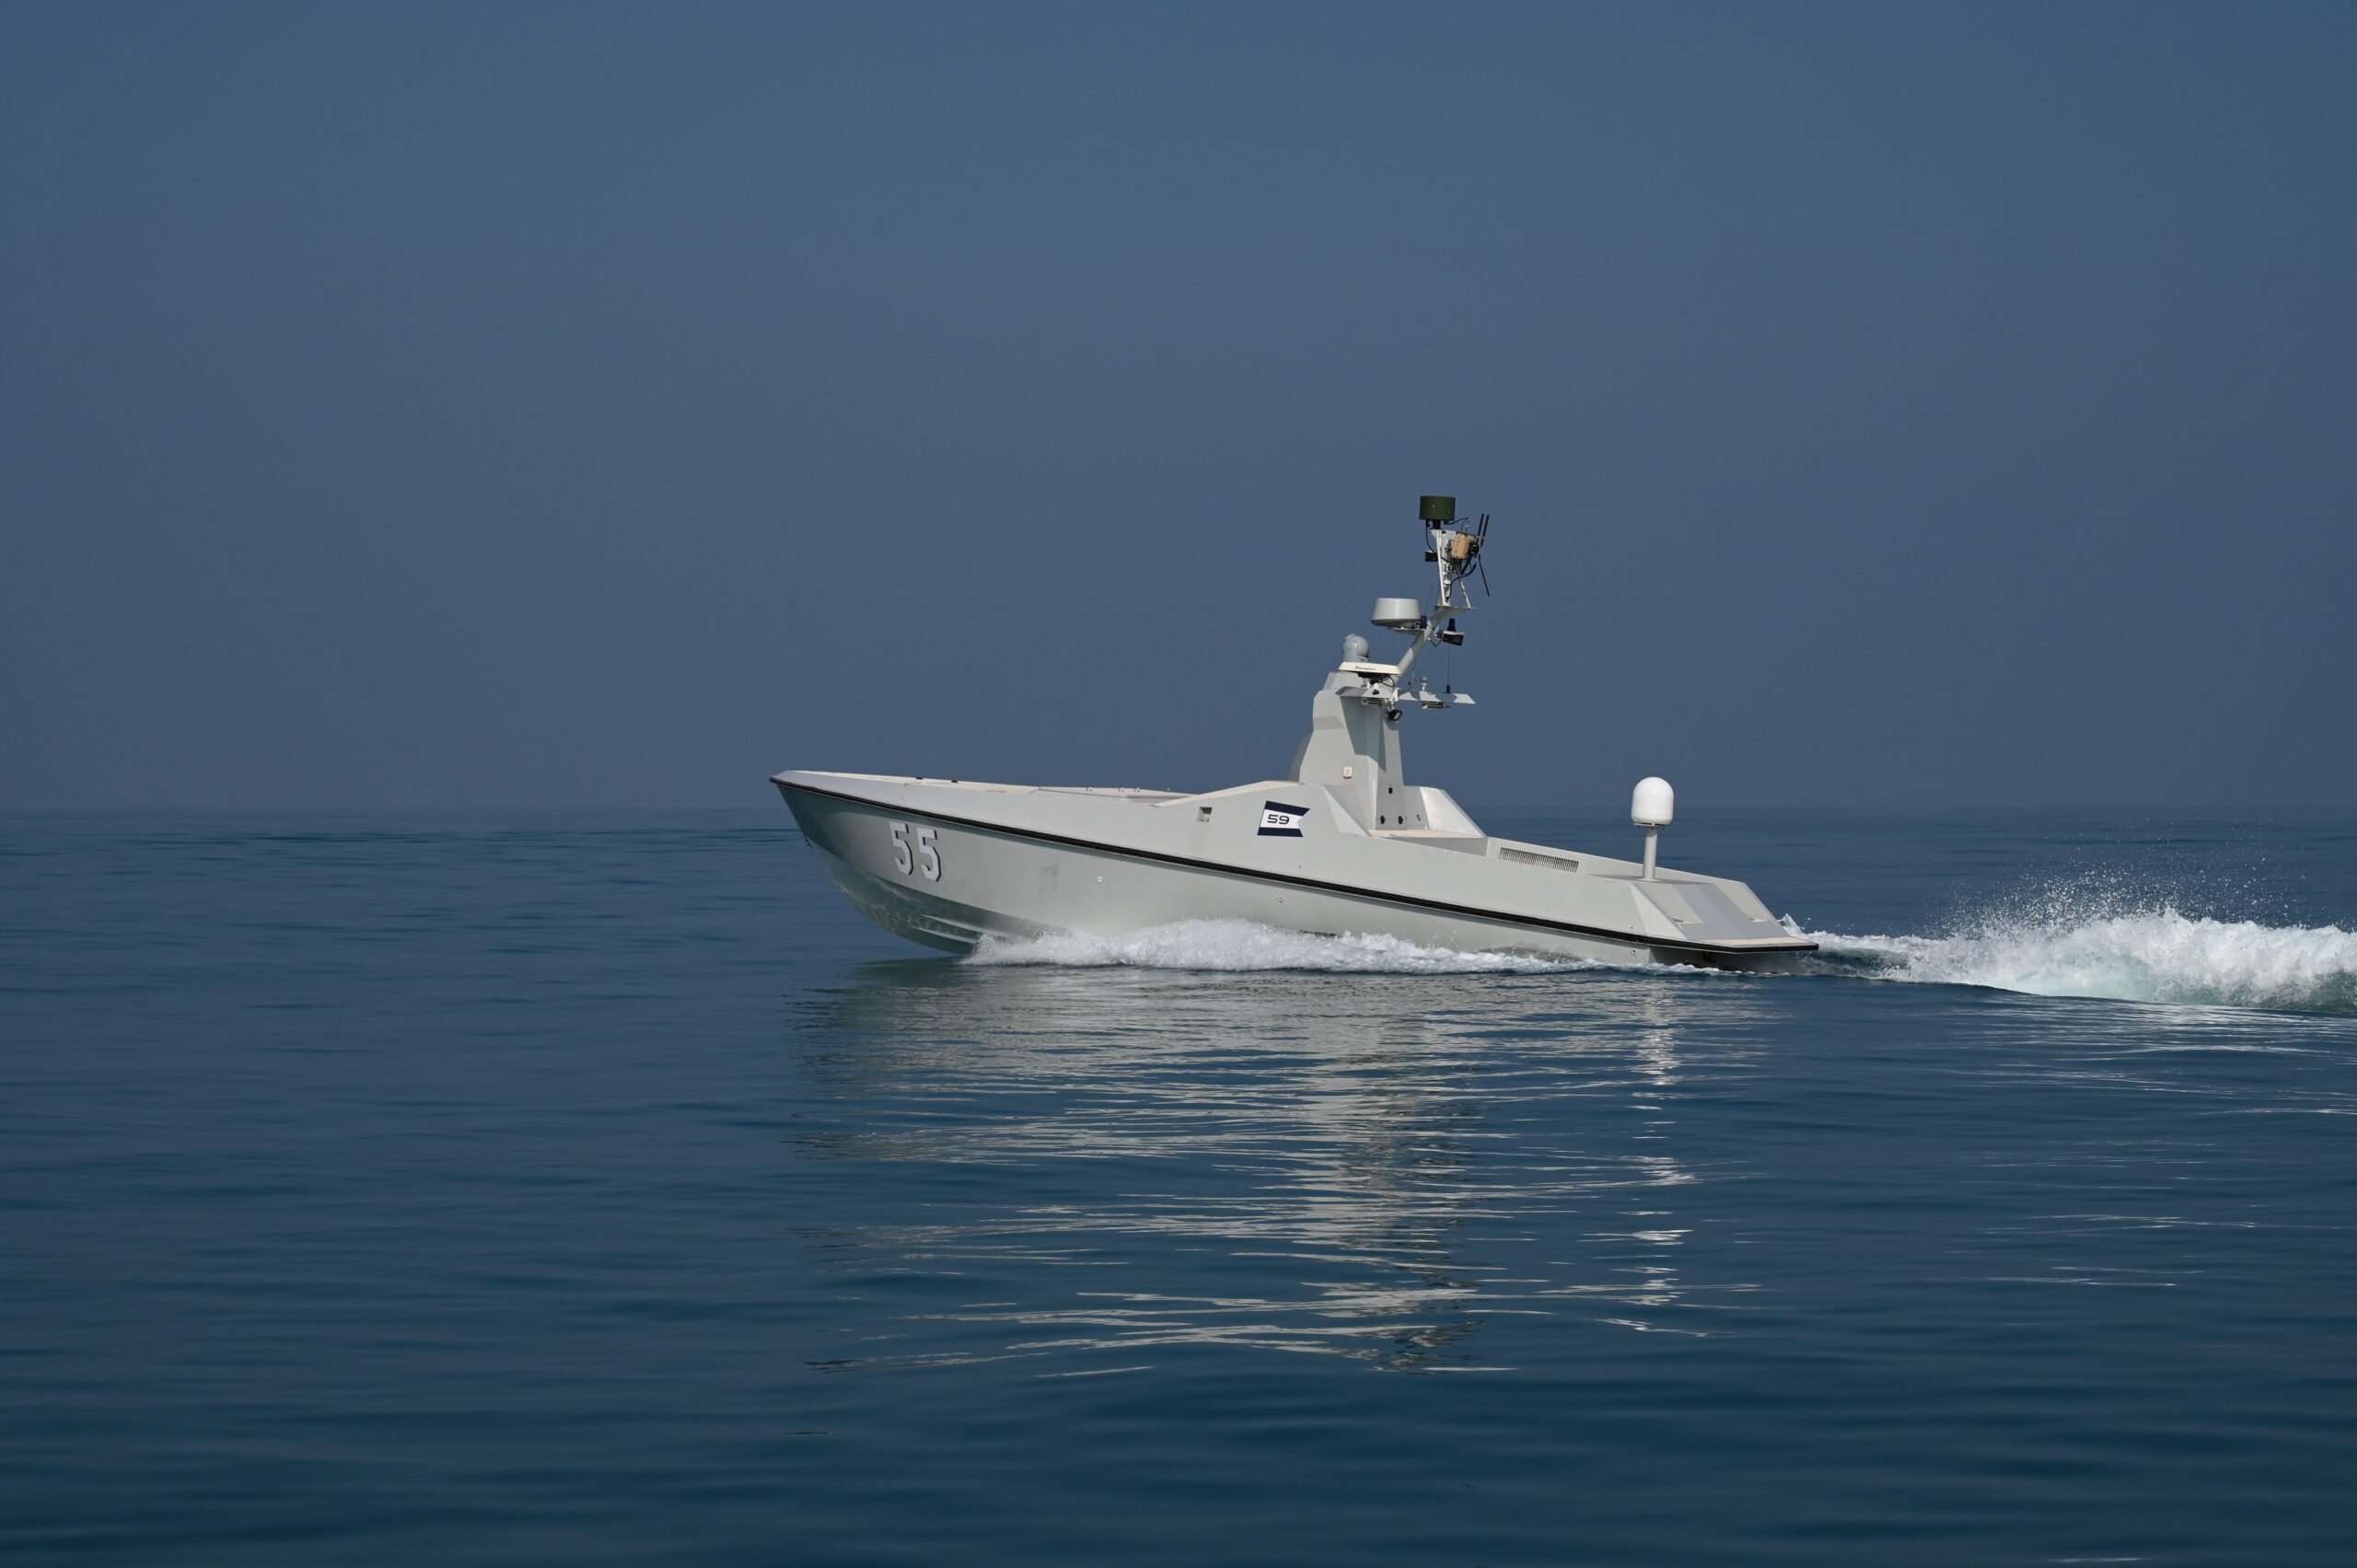 230122-N-ZA692-1374 ARABIAN GULF (Jan. 22, 2023) An L3 Harris Arabian Fox MAST-13 unmanned surface vessel sails in the Arabian Gulf, Jan. 22, during exercise Neon Defender 23. Neon Defender is an annual bilateral training event between U.S. Naval Forces Central Command and Bahrain that focuses on maritime security operations, and installation defense medical response. (U.S. Navy photo by Mass Communication Specialist 1st Class Anita Chebahtah)